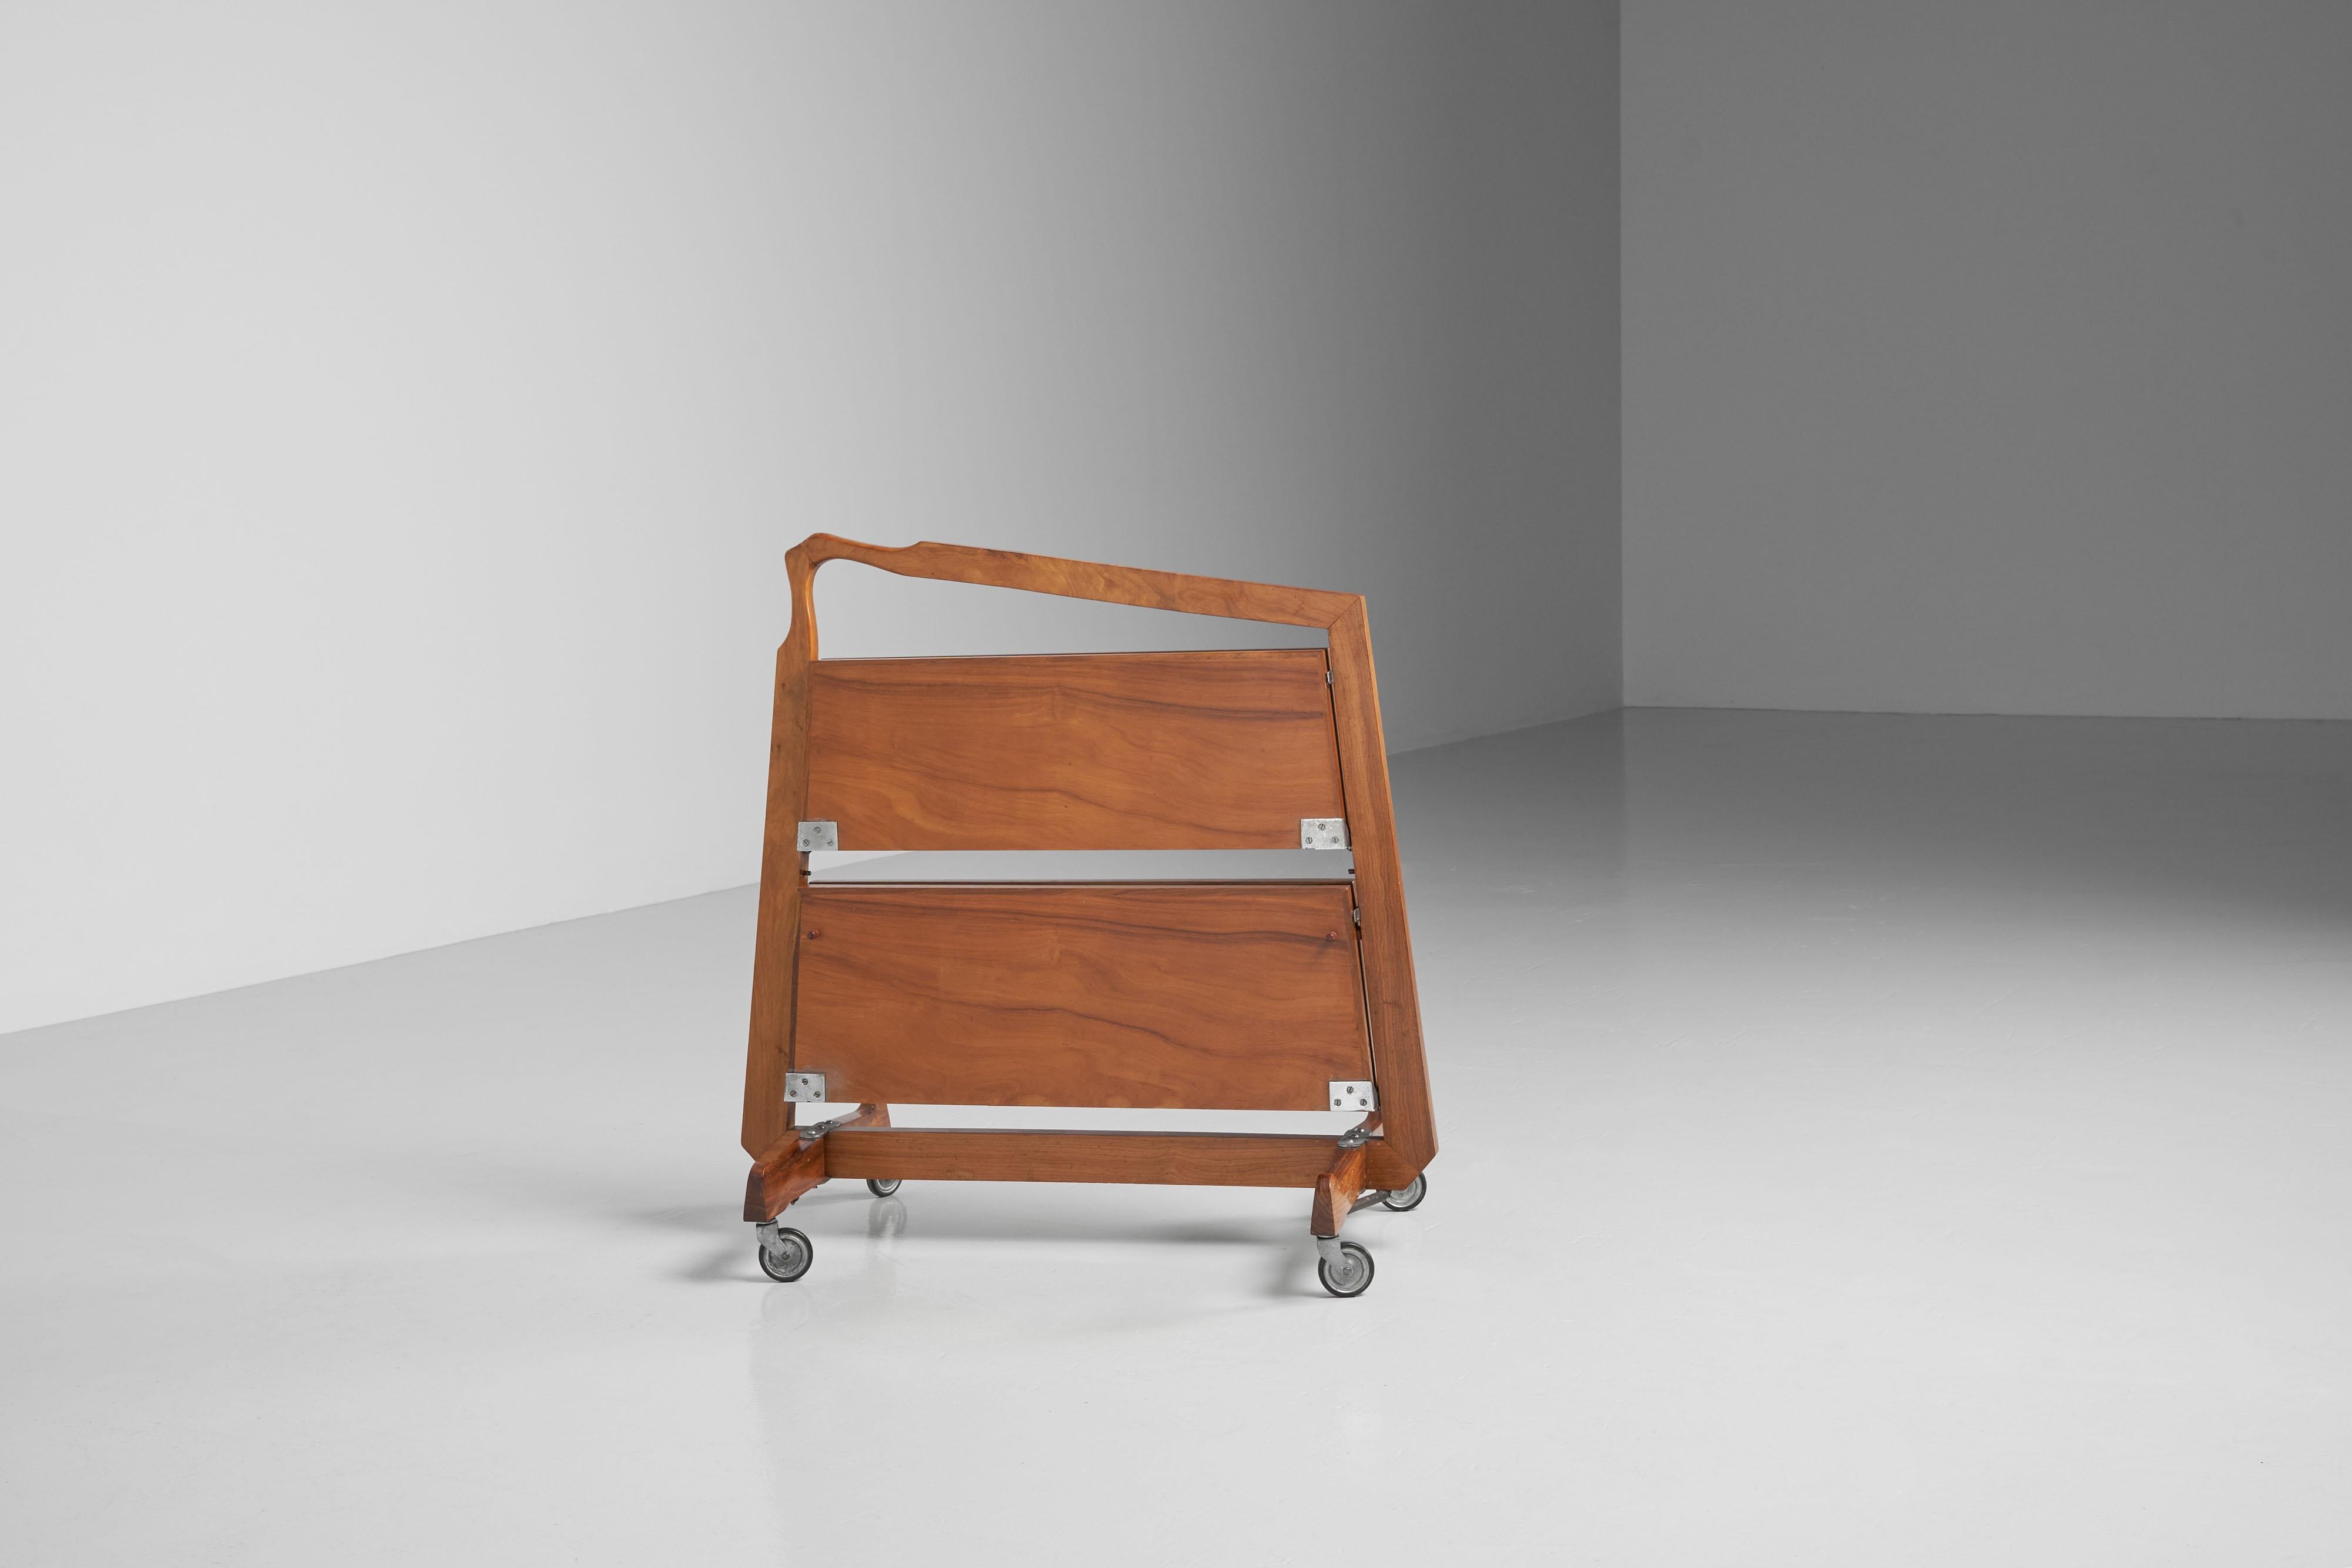 Fortalit Sculptural Serving Trolley Brazil 1960 In Good Condition For Sale In Roosendaal, Noord Brabant